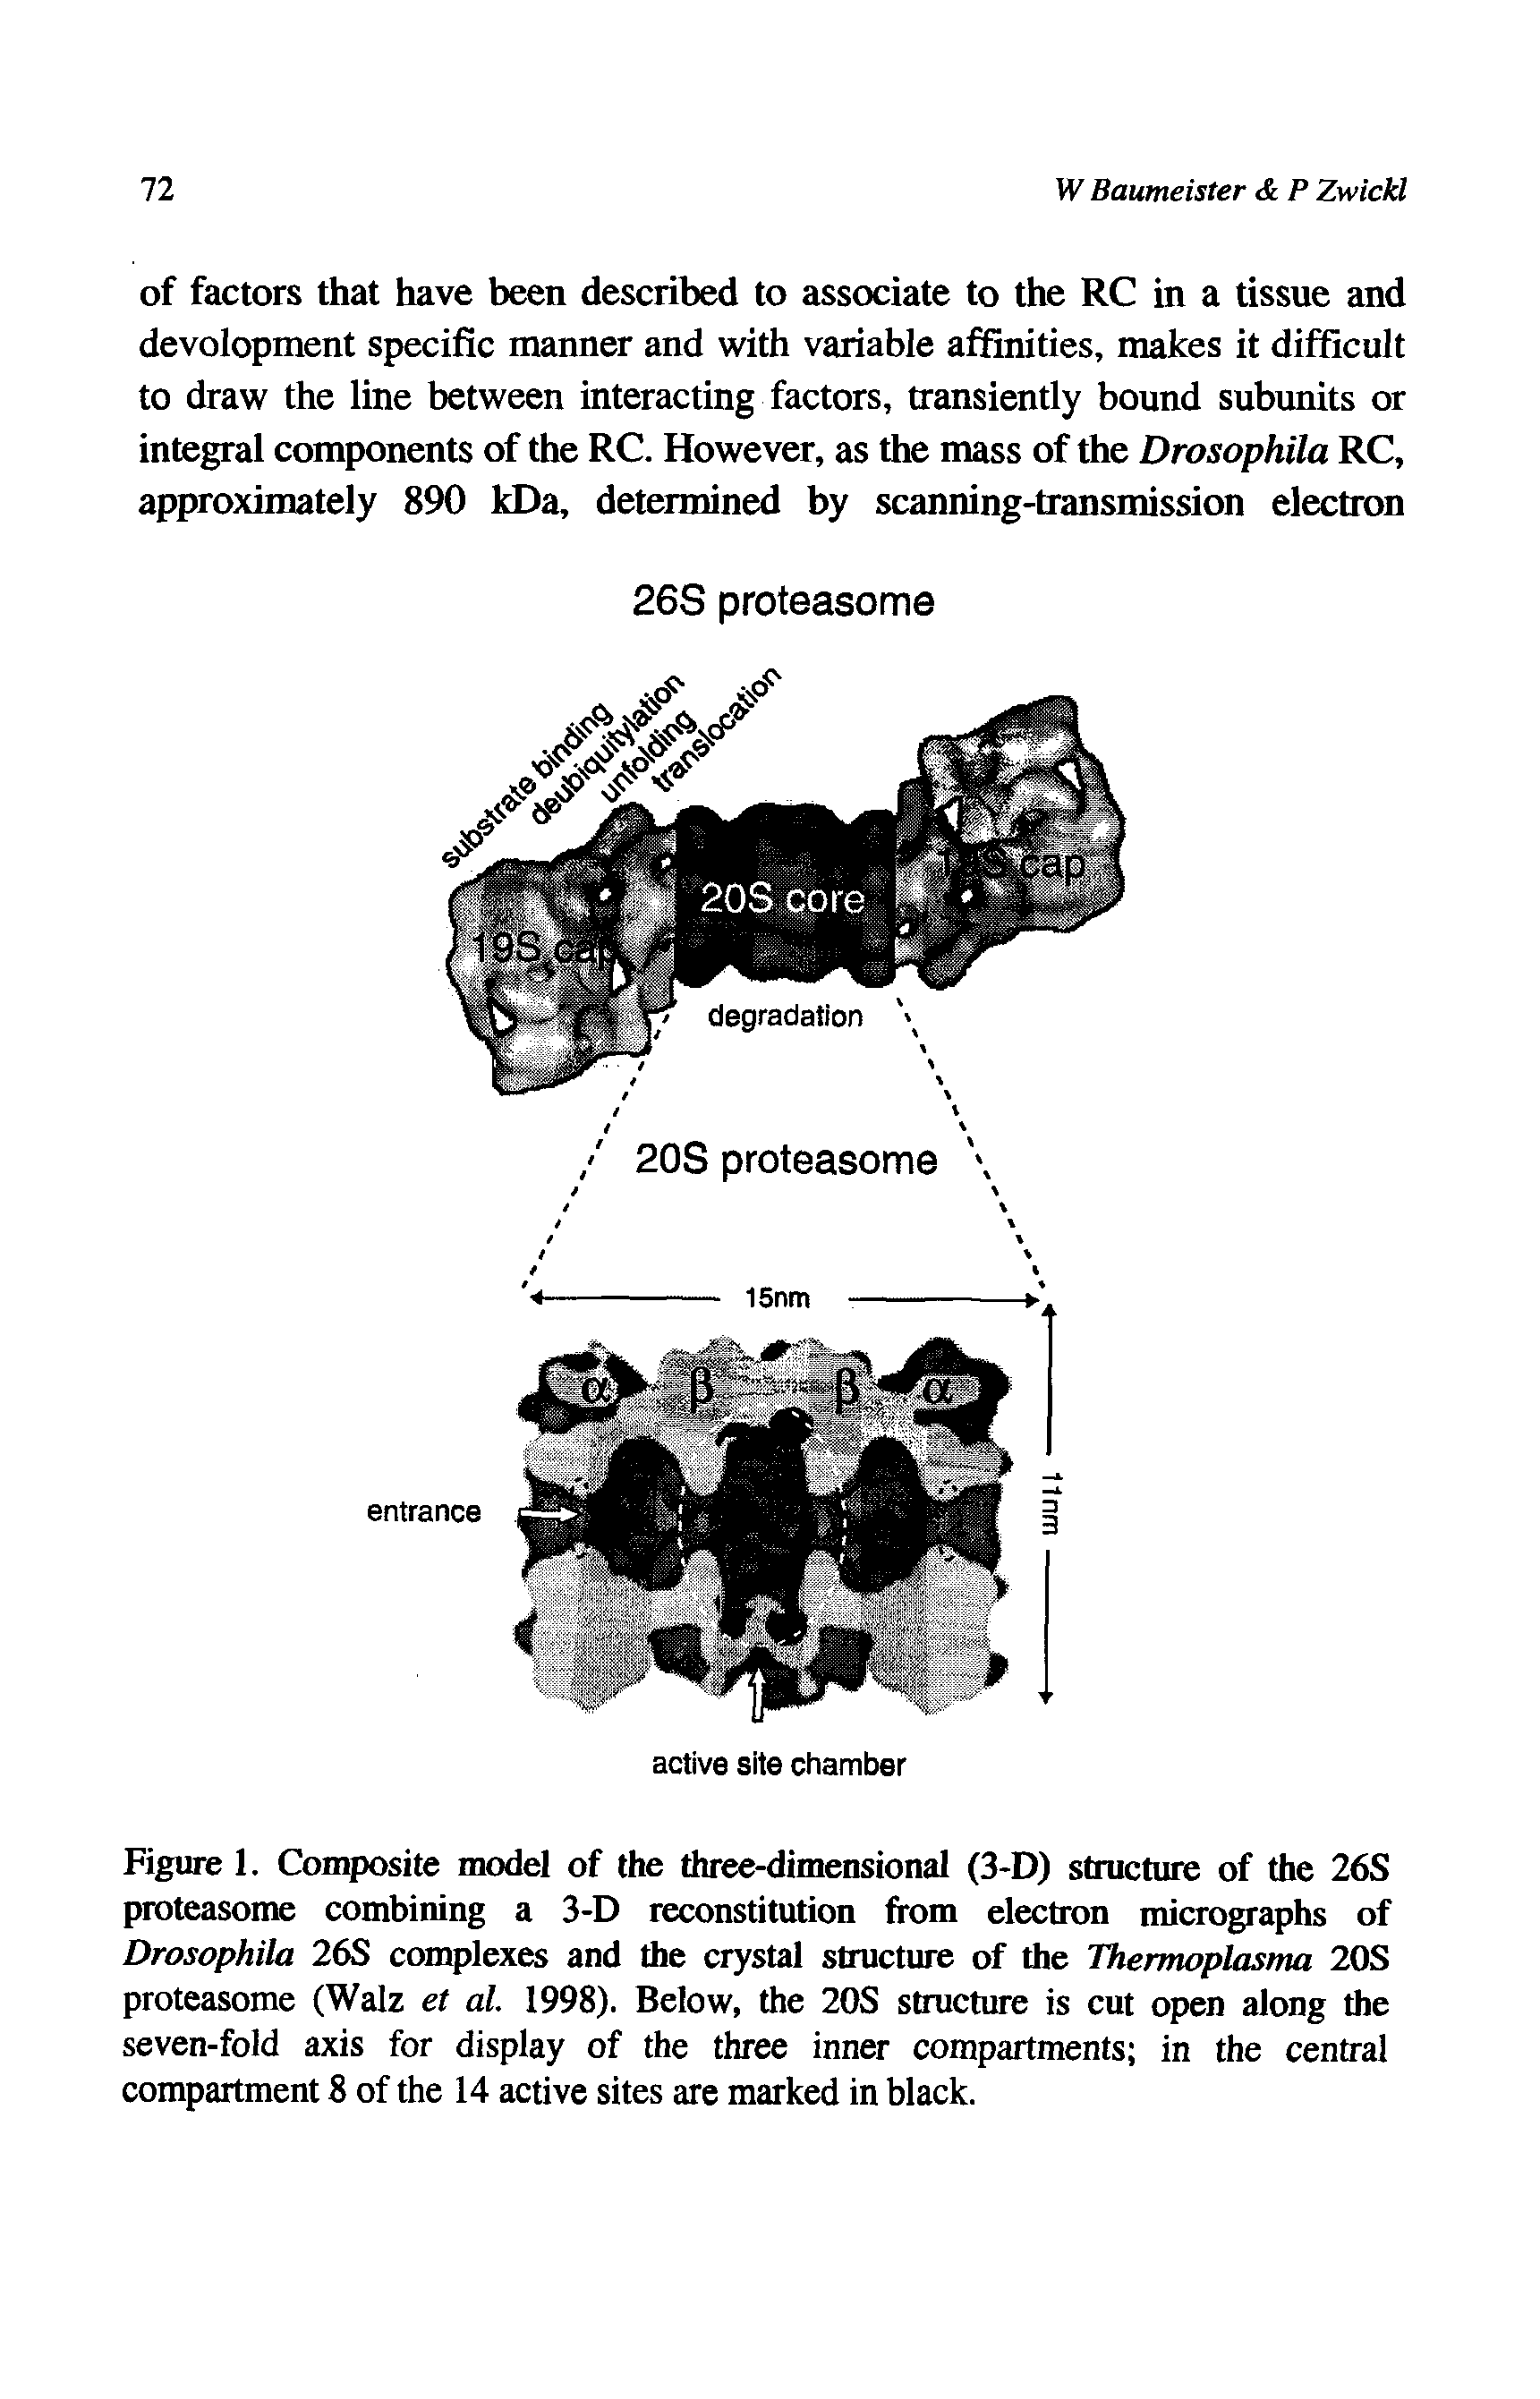 Figure 1. Composite model of the three-dimensional (3-D) stmcture of the 26S proteasome combining a 3-D reconstitution from electron micrographs of Drosophila 26S complexes and the crystal structure of the Thermoplasma 20S proteasome (Walz et al. 1998). Below, the 20S structure is cut open along the seven-fold axis for display of the three inner compartments in the central compartment 8 of the 14 active sites are marked in black.